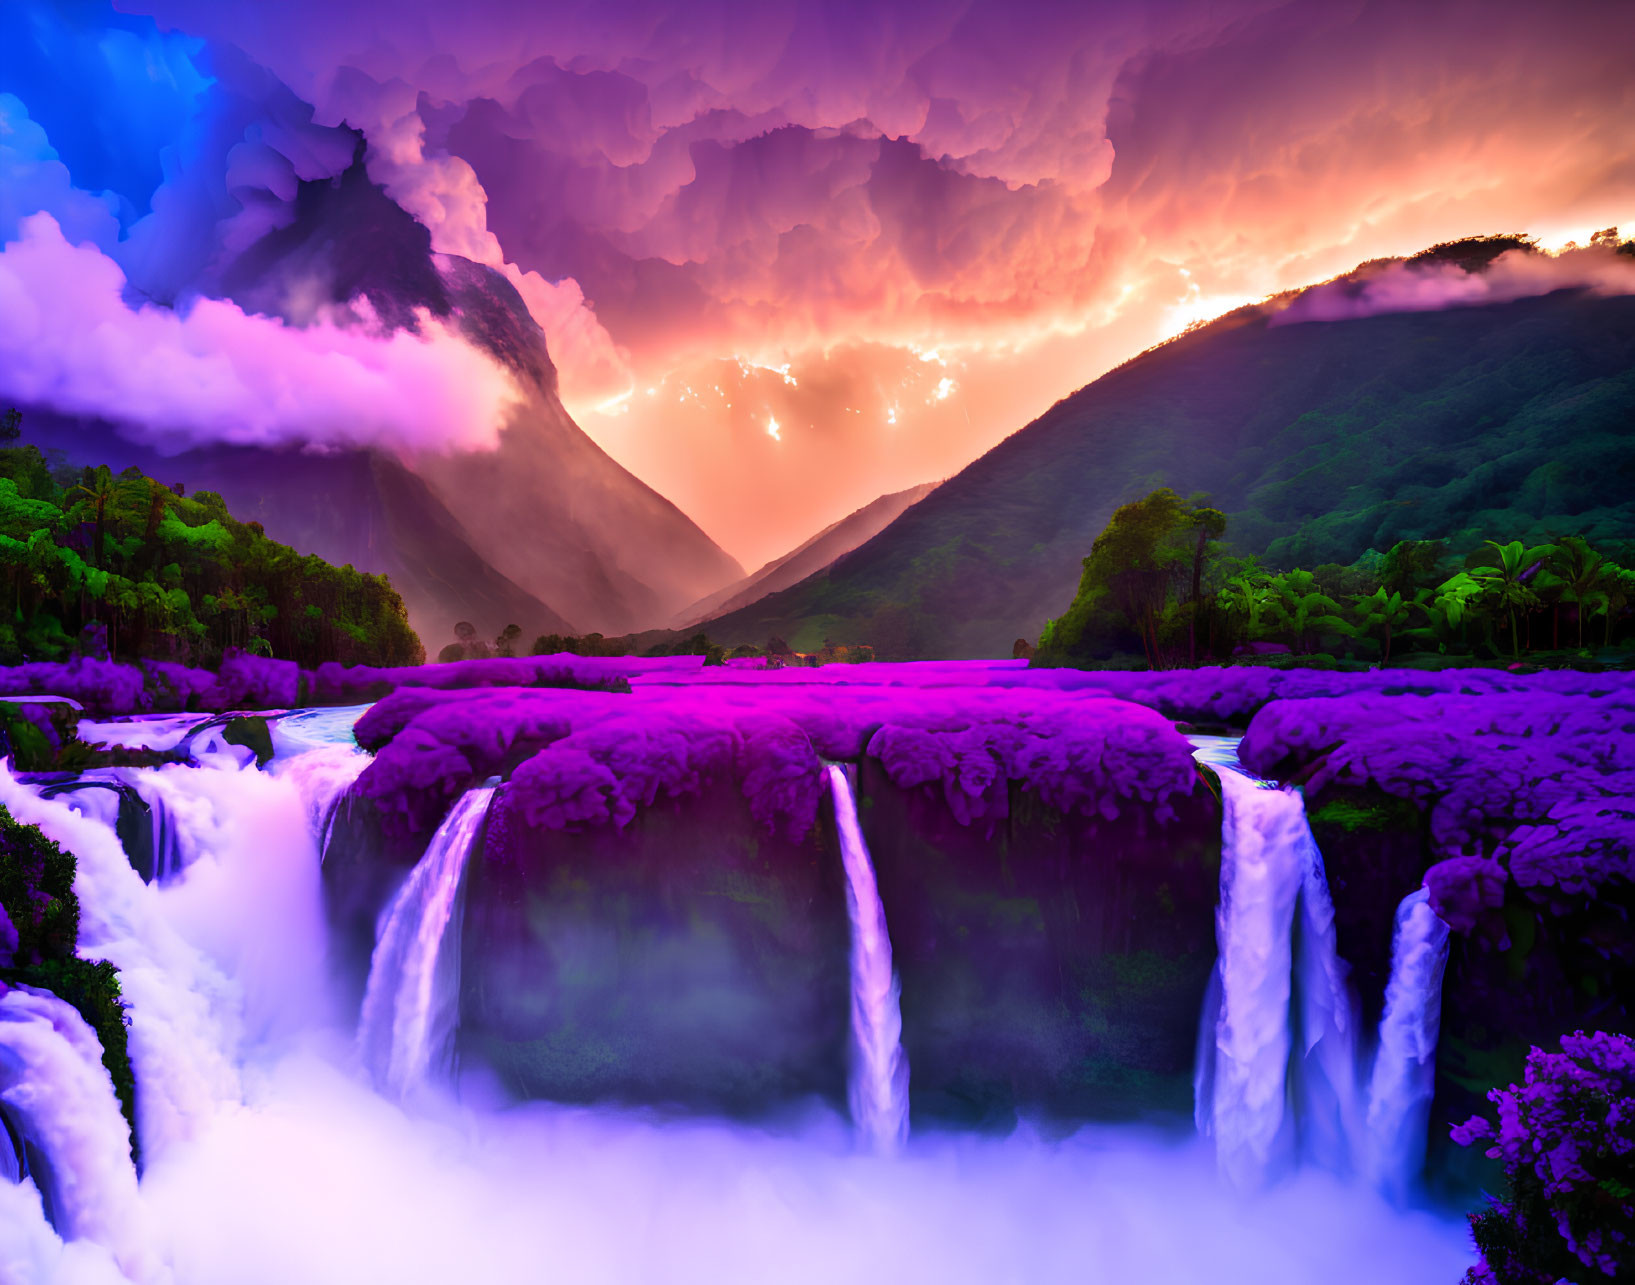 Cascading Waterfall in Lush Greenery with Purple Foliage under Dramatic Sky